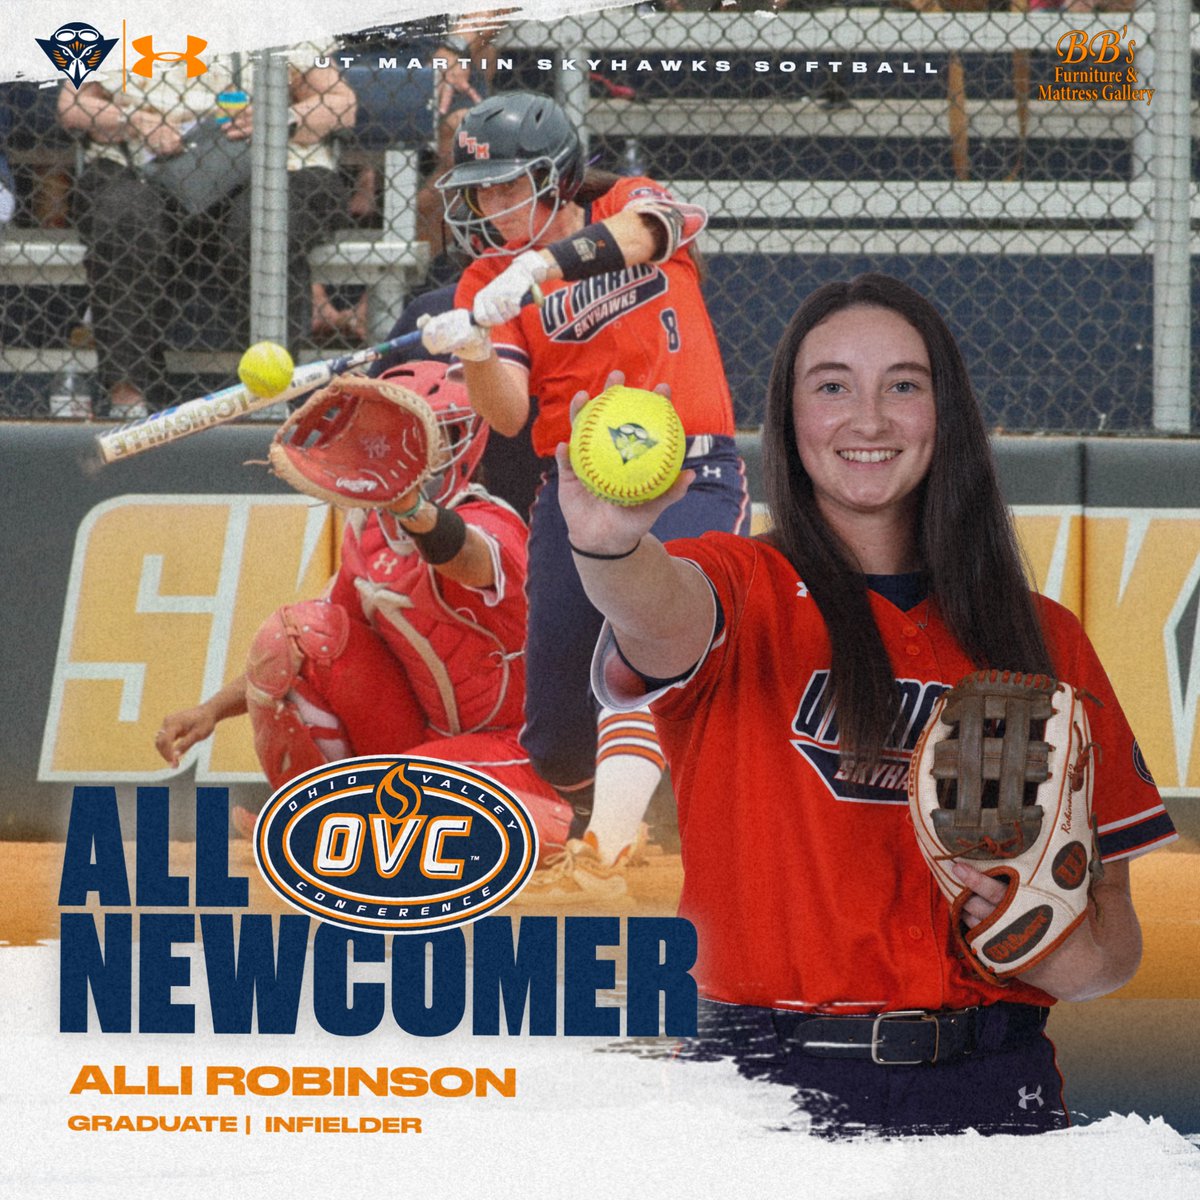 Congratulations to @UTMSoftball infielder Alli Robinson on claiming a spot on the OVC All-Newcomer team! 🥎 .298 average | 8 2Bs | 2 HR | 19 RBIs 🥎 .855 OPS | 8 multi-hit games Story: tinyurl.com/5b6zctub #MartinMade | #OVCit